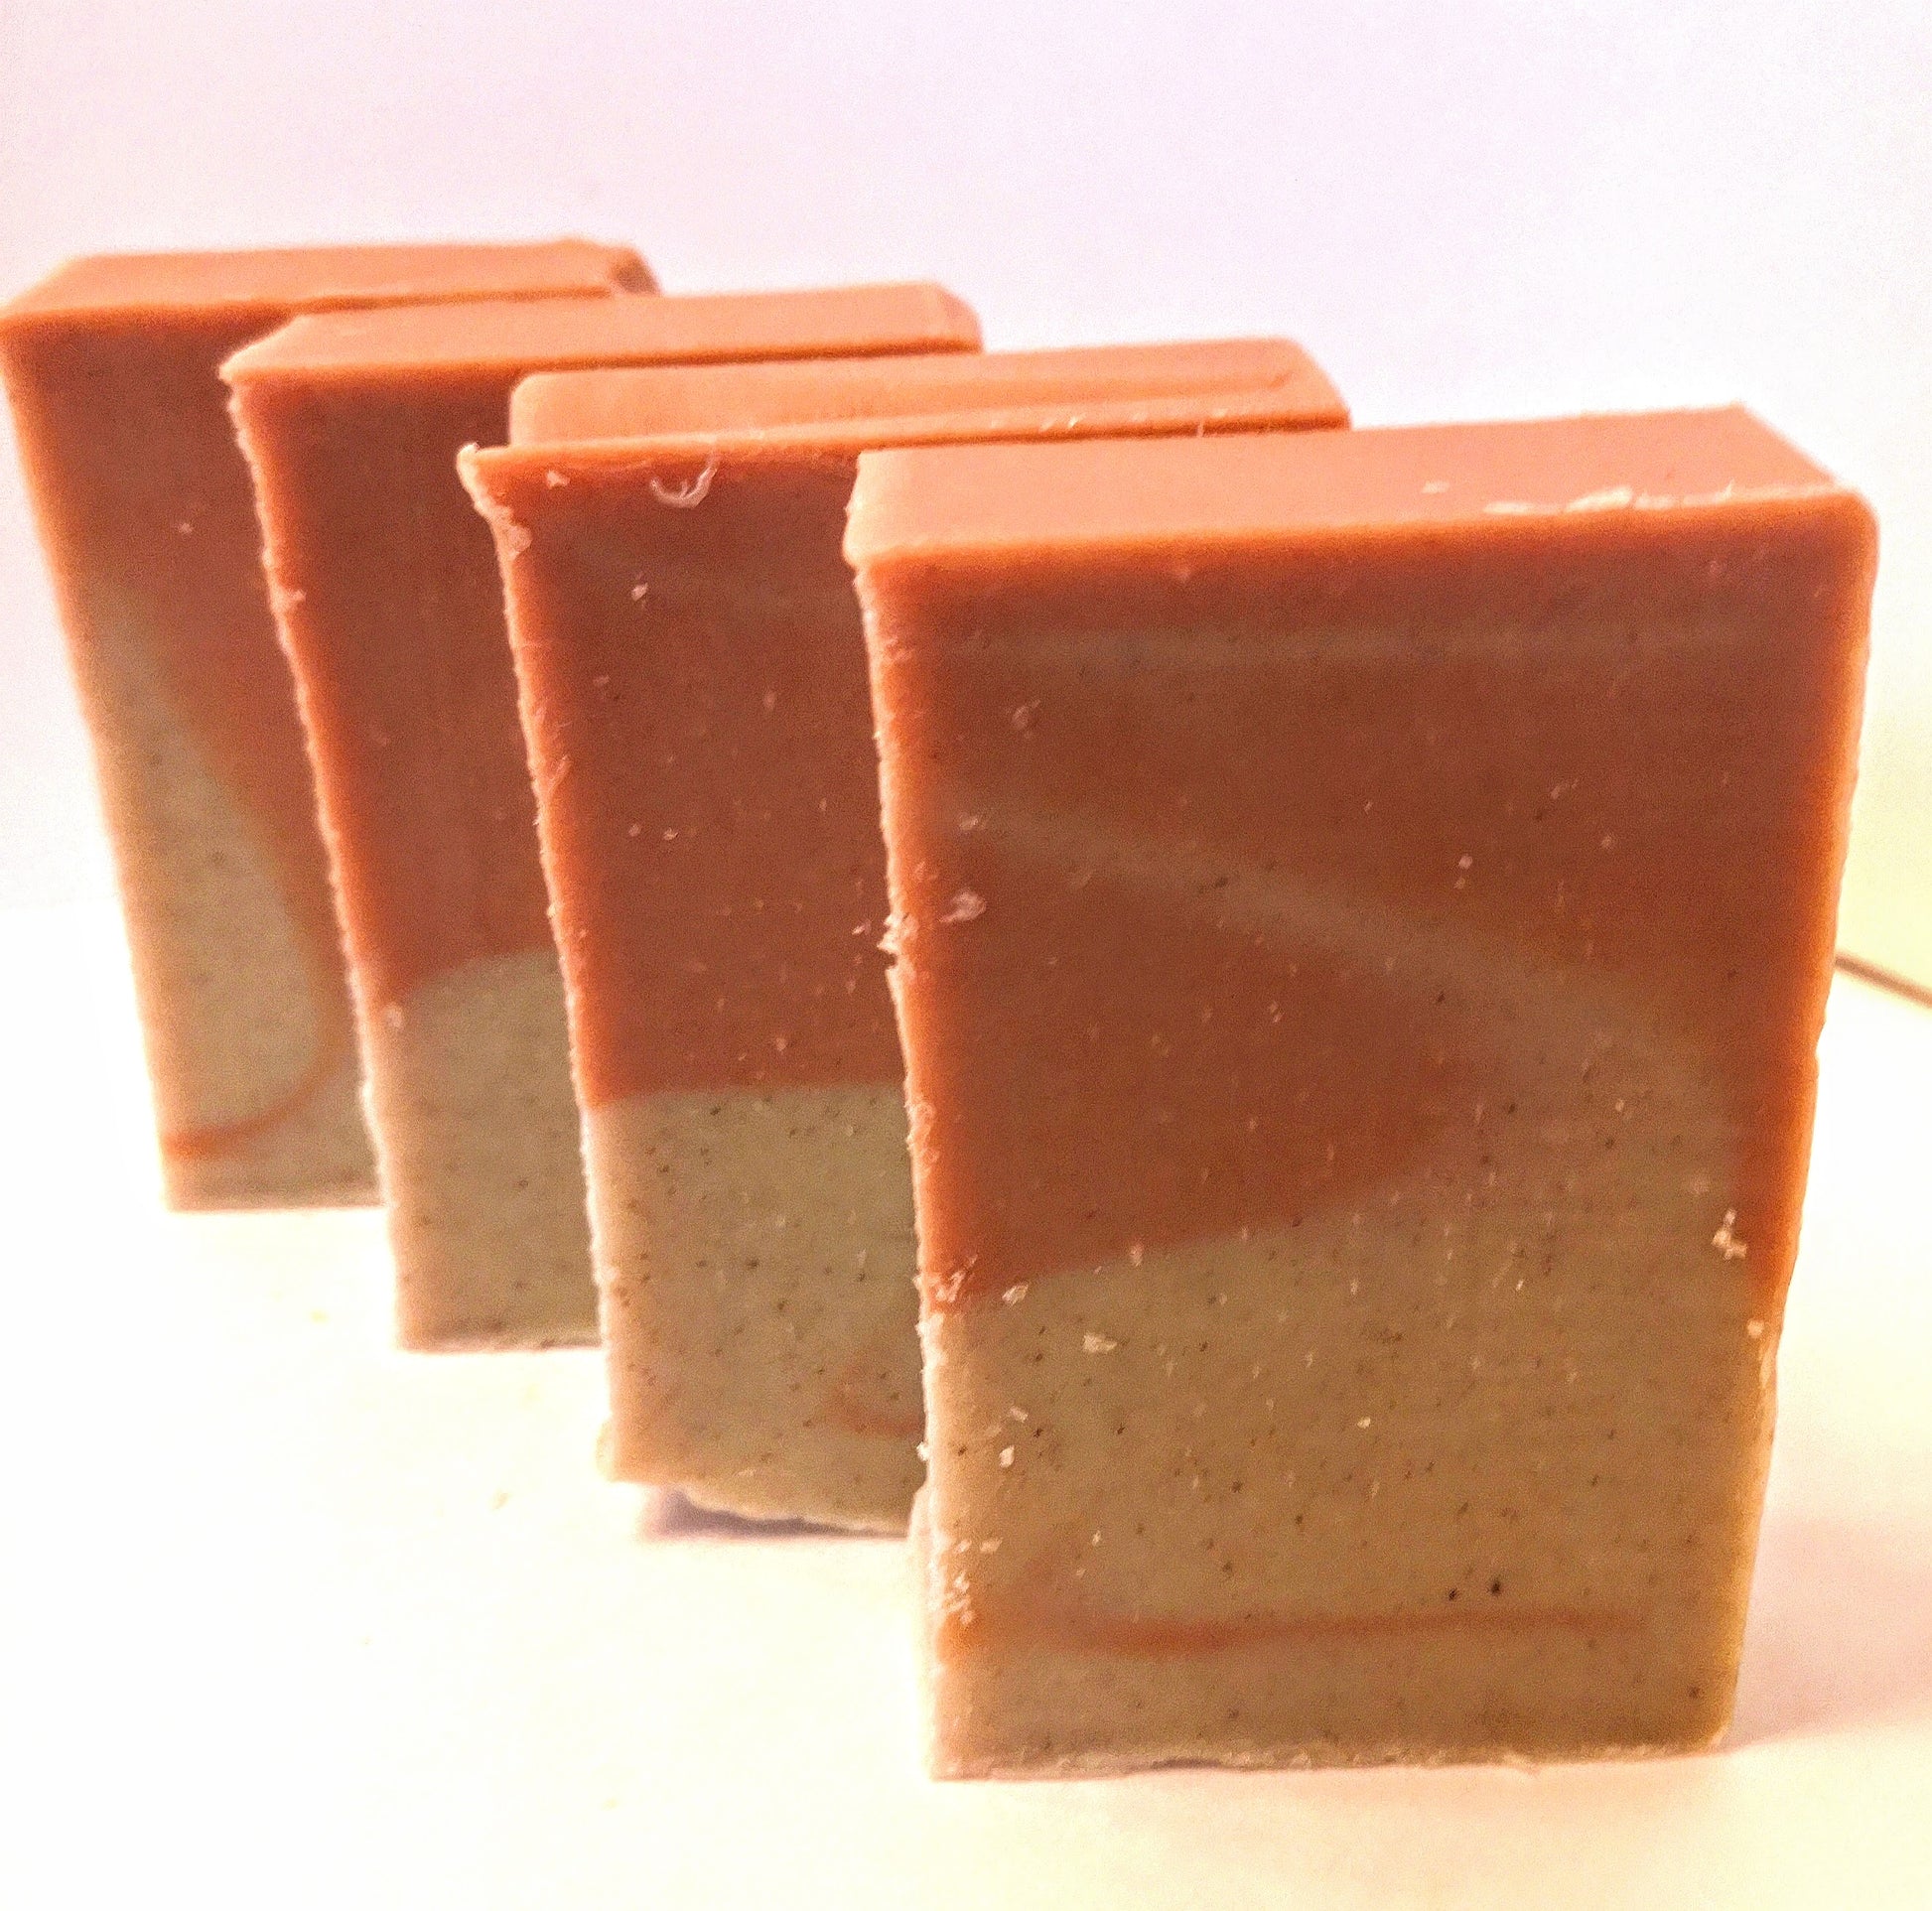 Four bars of soap on white background. Pink on upper half and peach coloured on lower half with swirl in middle of the bar. 